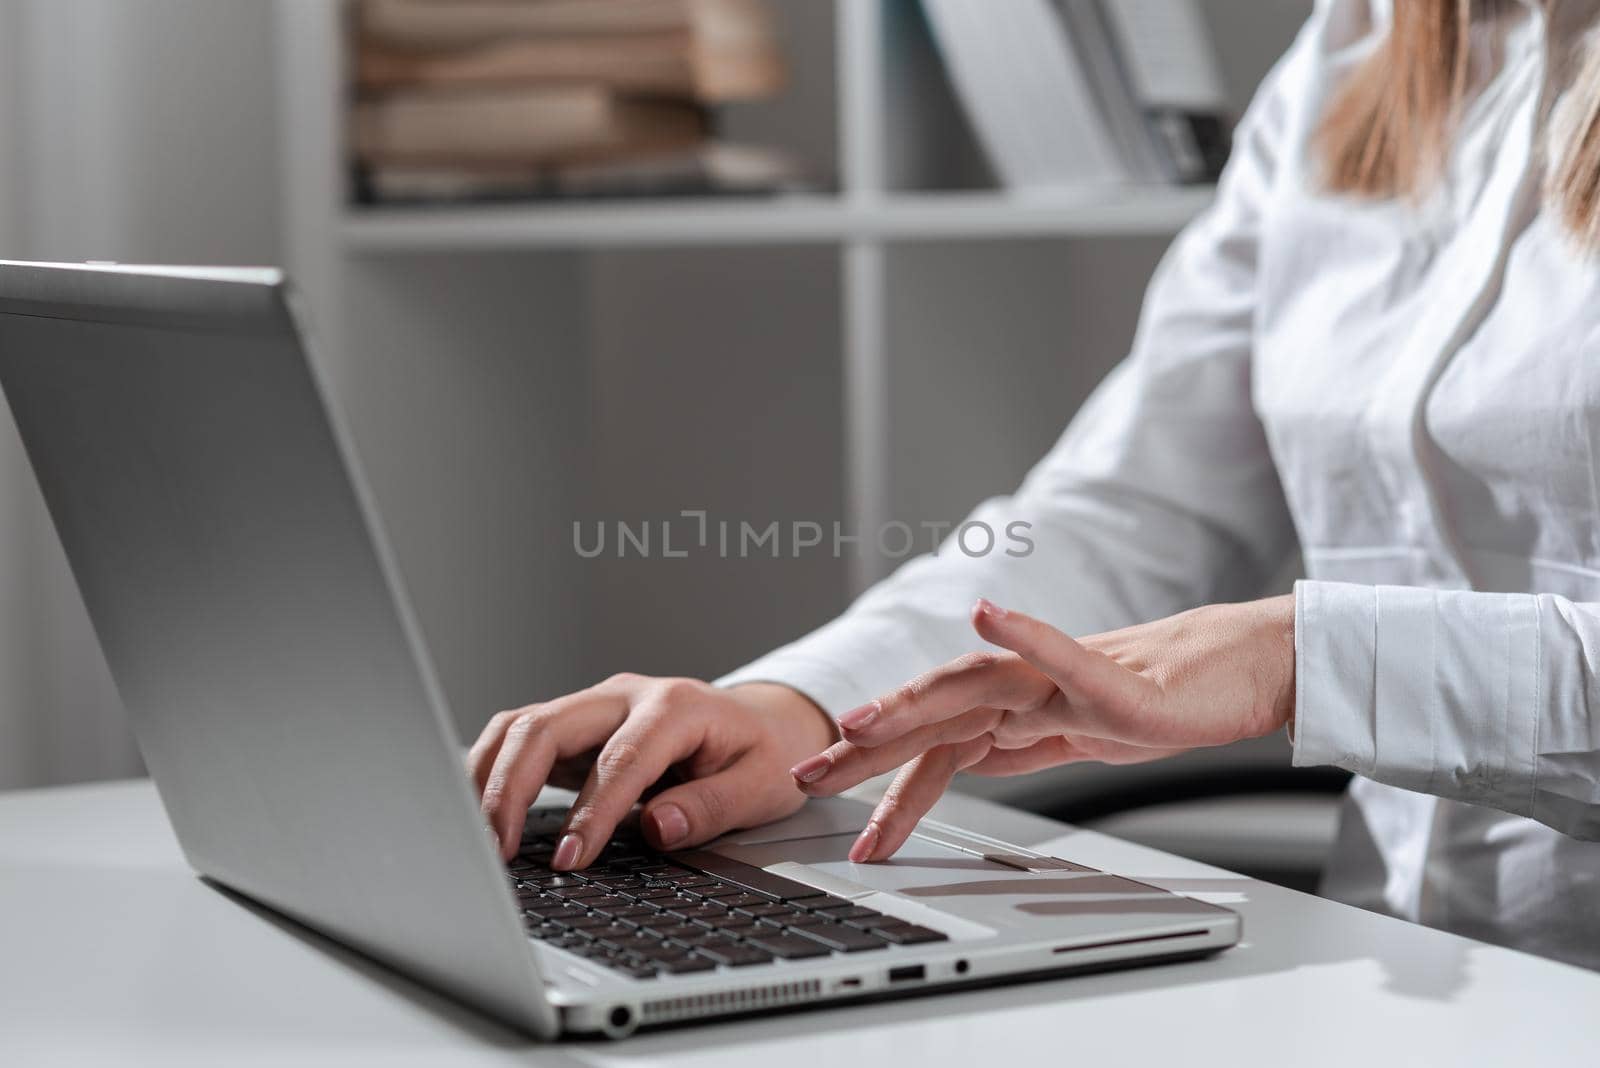 Businesswoman Typing Recent Updates On Lap Top Keyboard On Desk.